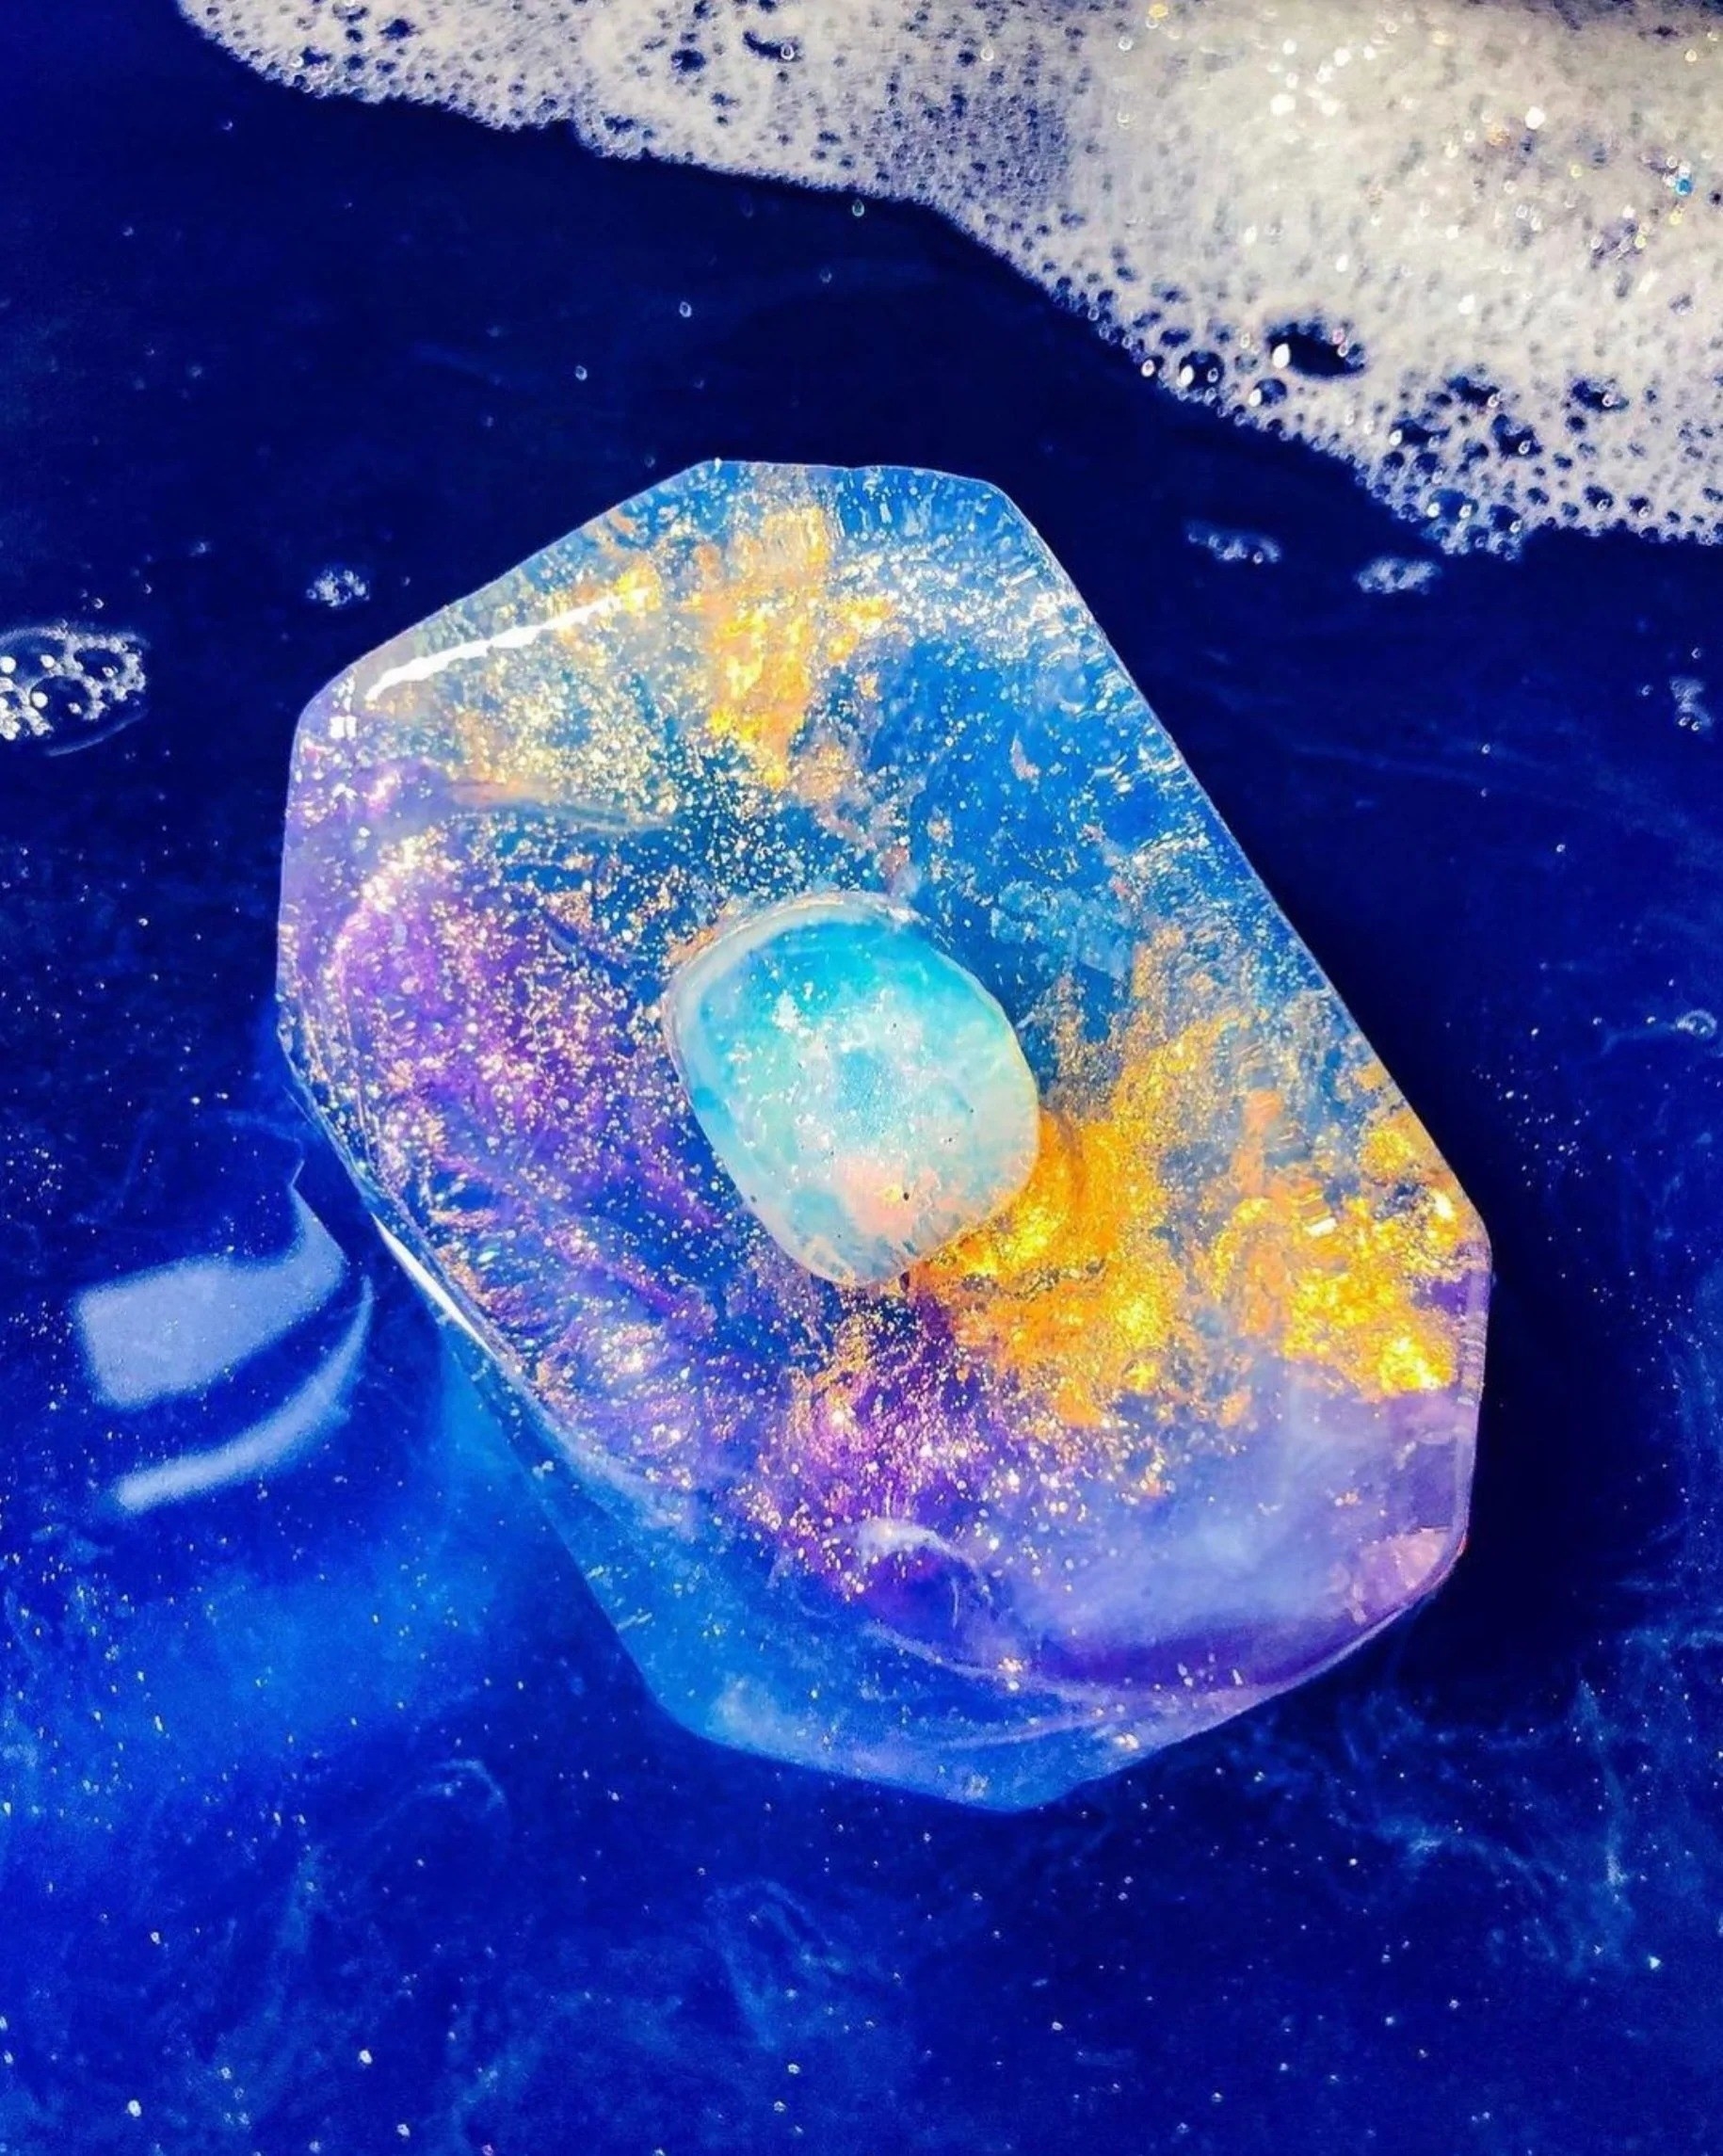 The bar of purple and blue soap with gold glitter, plus the opalite crystal in the center